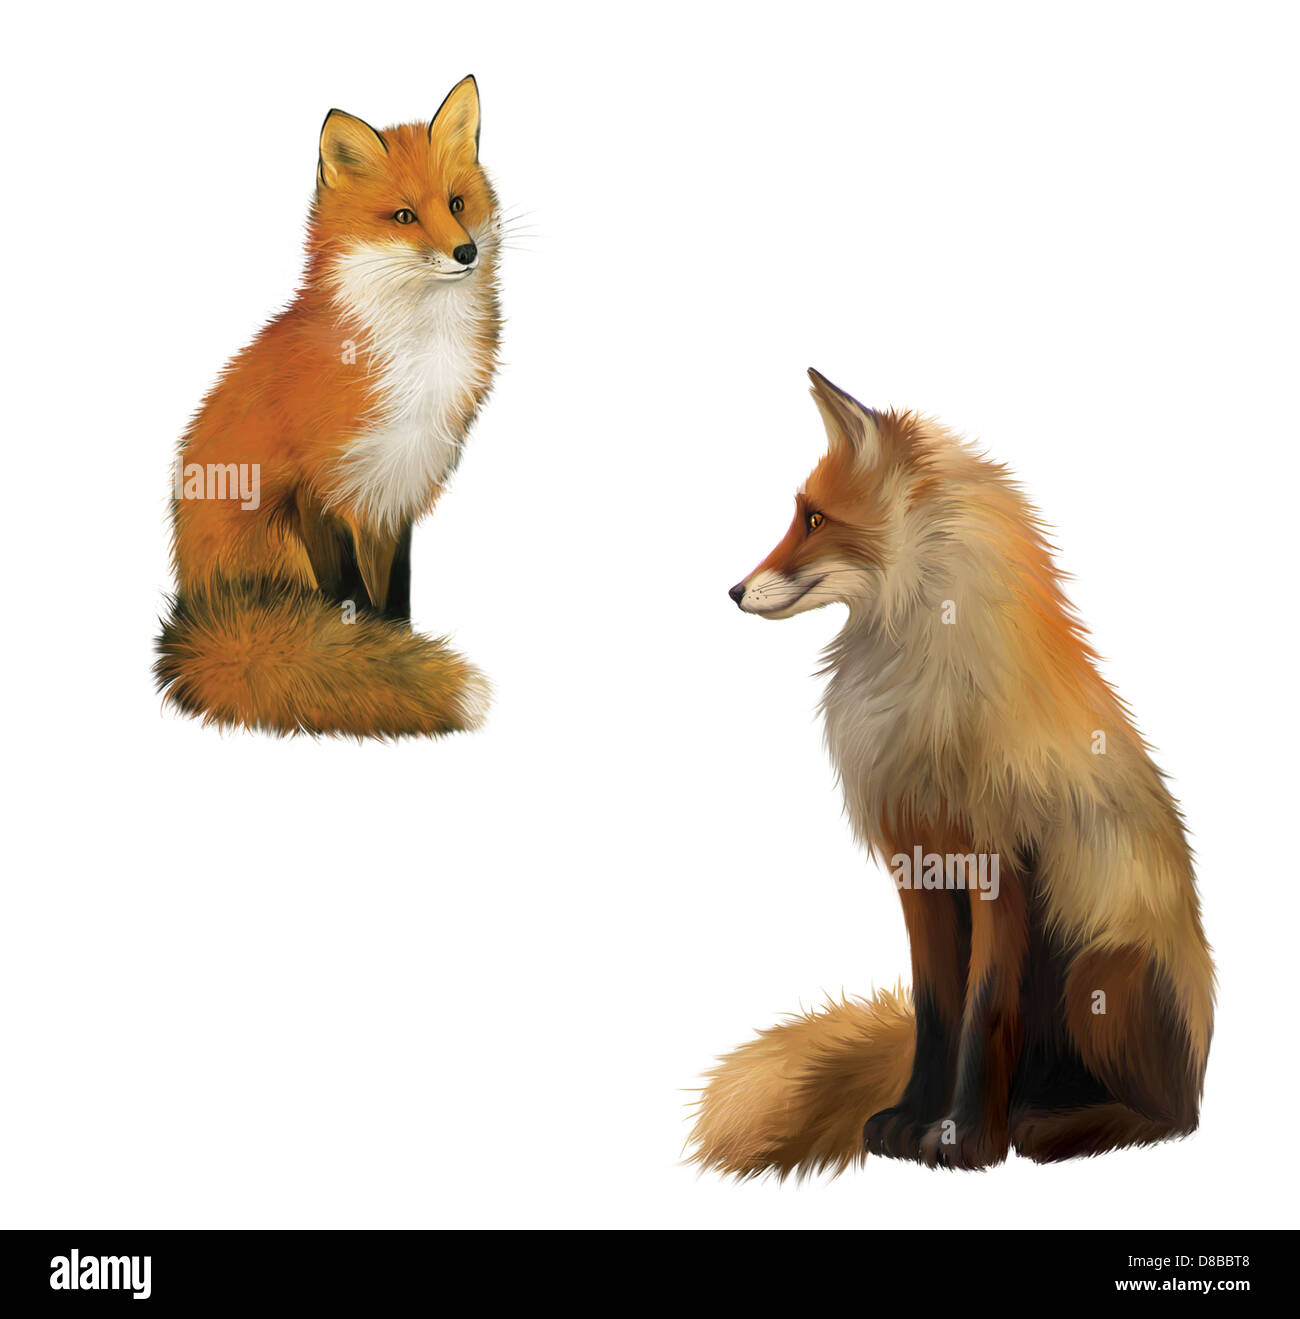 Adult shaggy red Fox sittng with big fluffy tail. Isolated Illustration on white background. Stock Photo